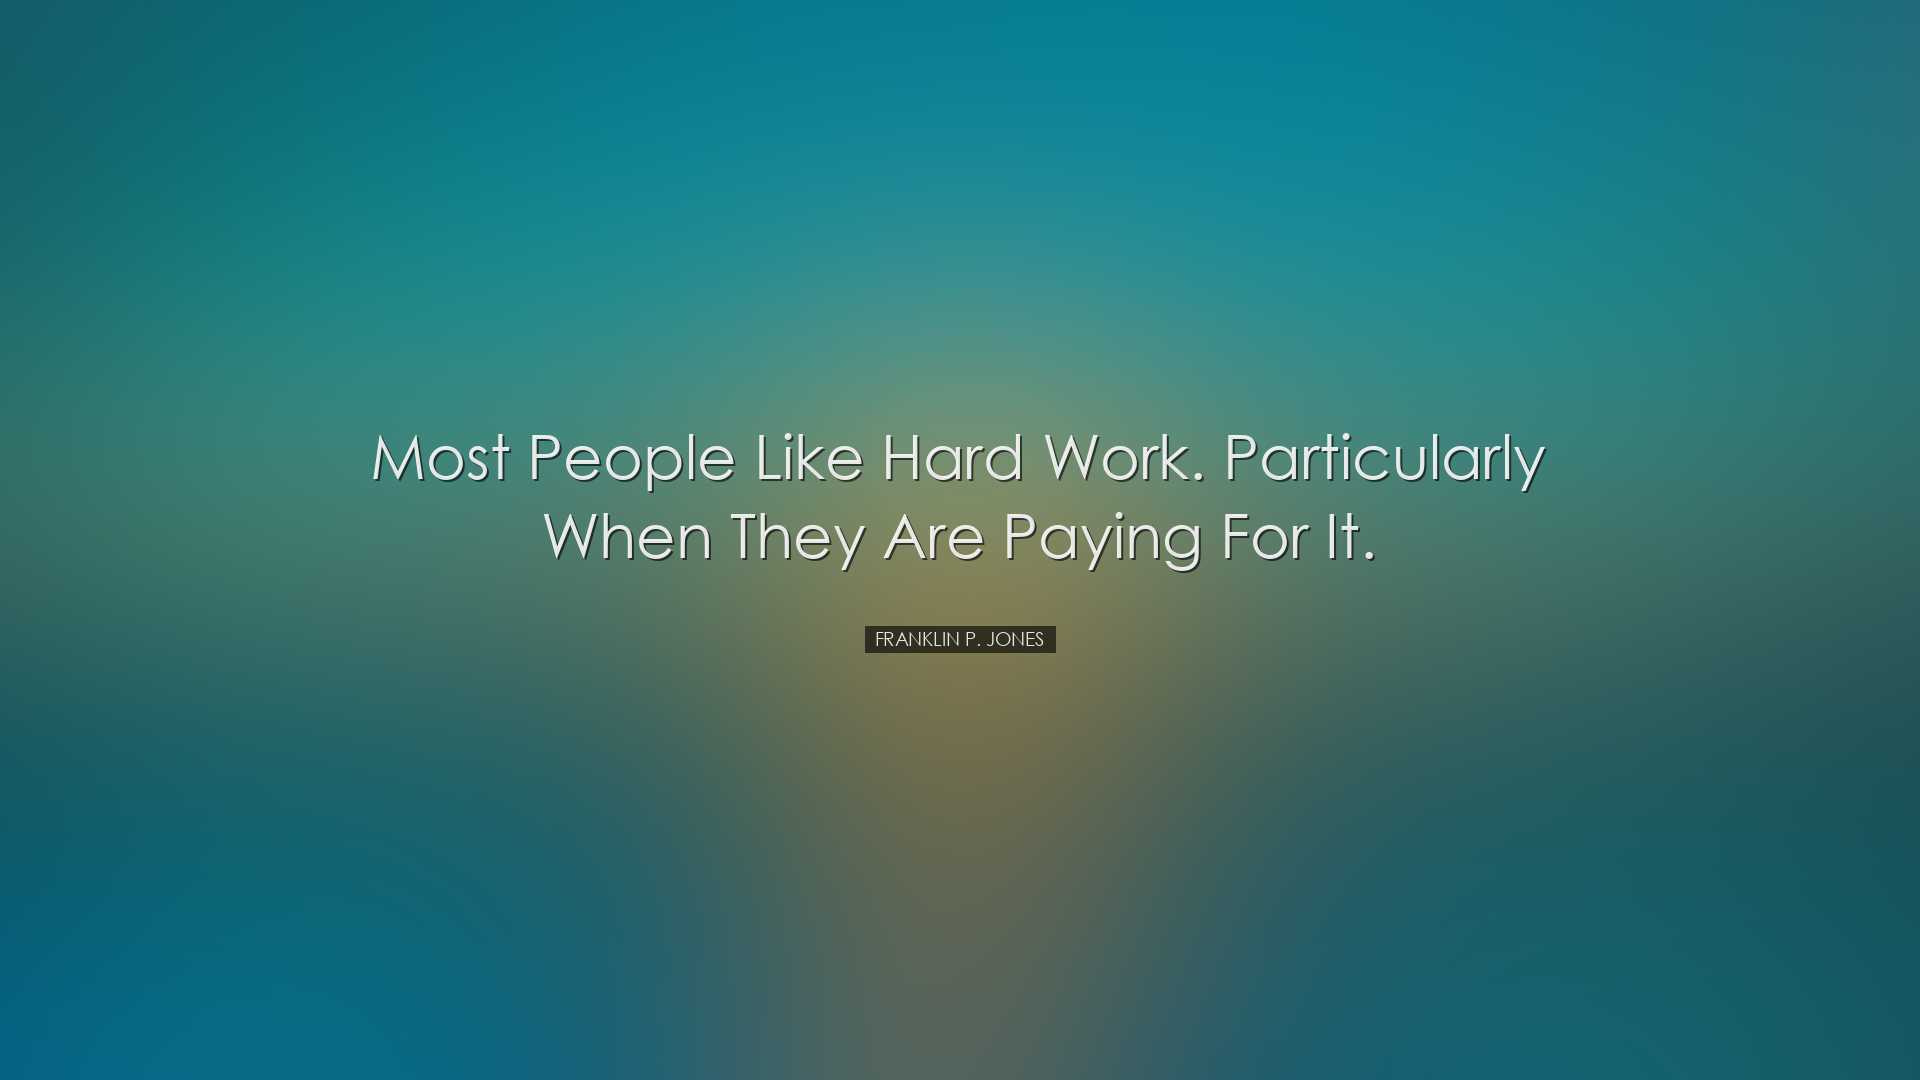 Most people like hard work. Particularly when they are paying for